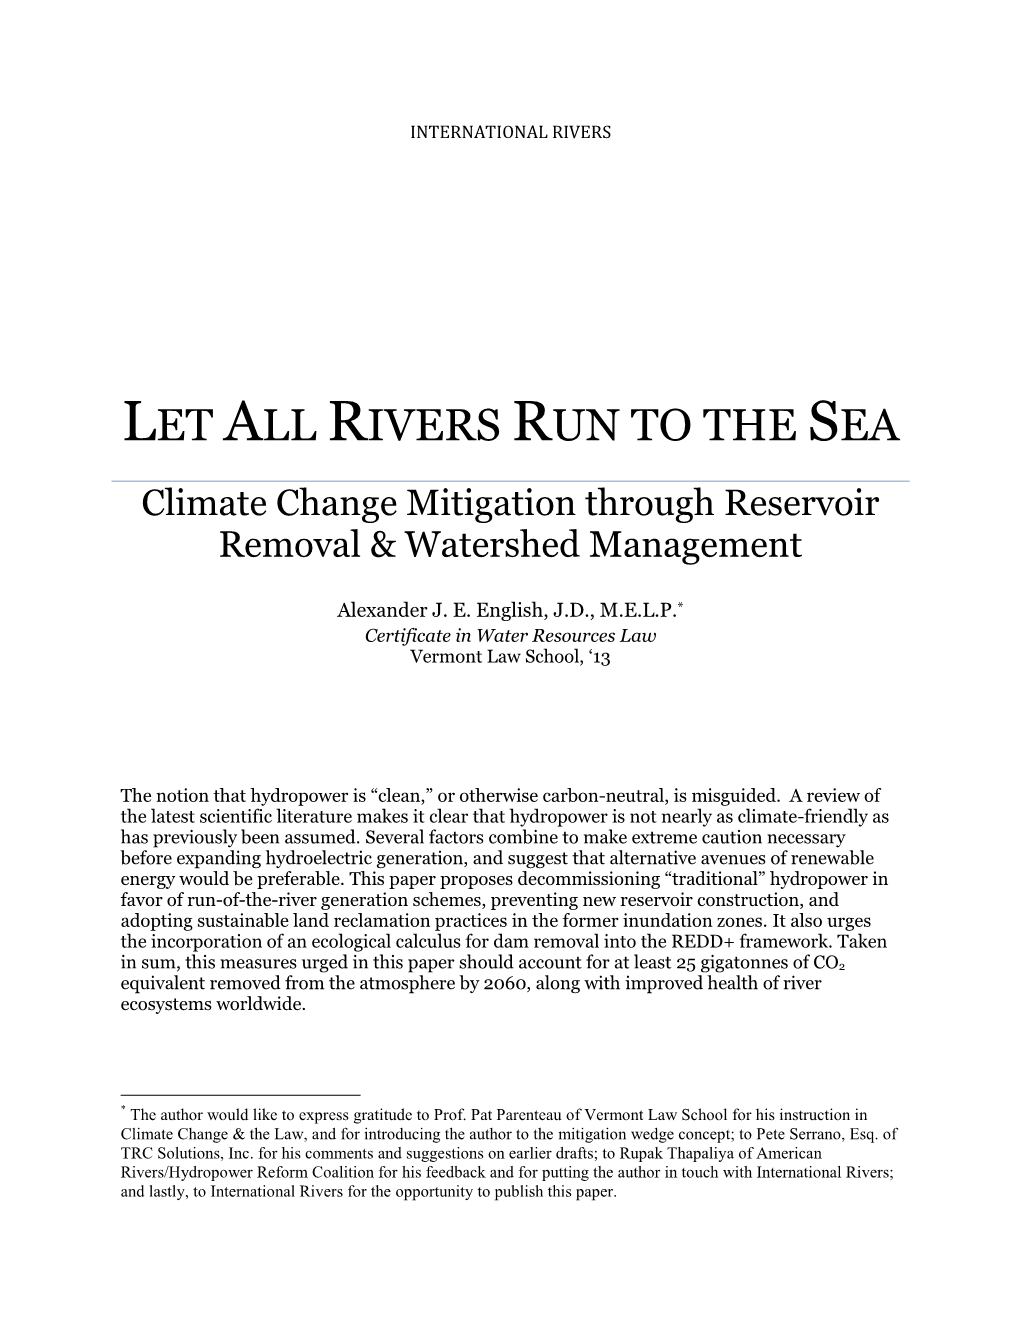 LET ALL RIVERS RUN to the SEA Climate Change Mitigation Through Reservoir Removal & Watershed Management